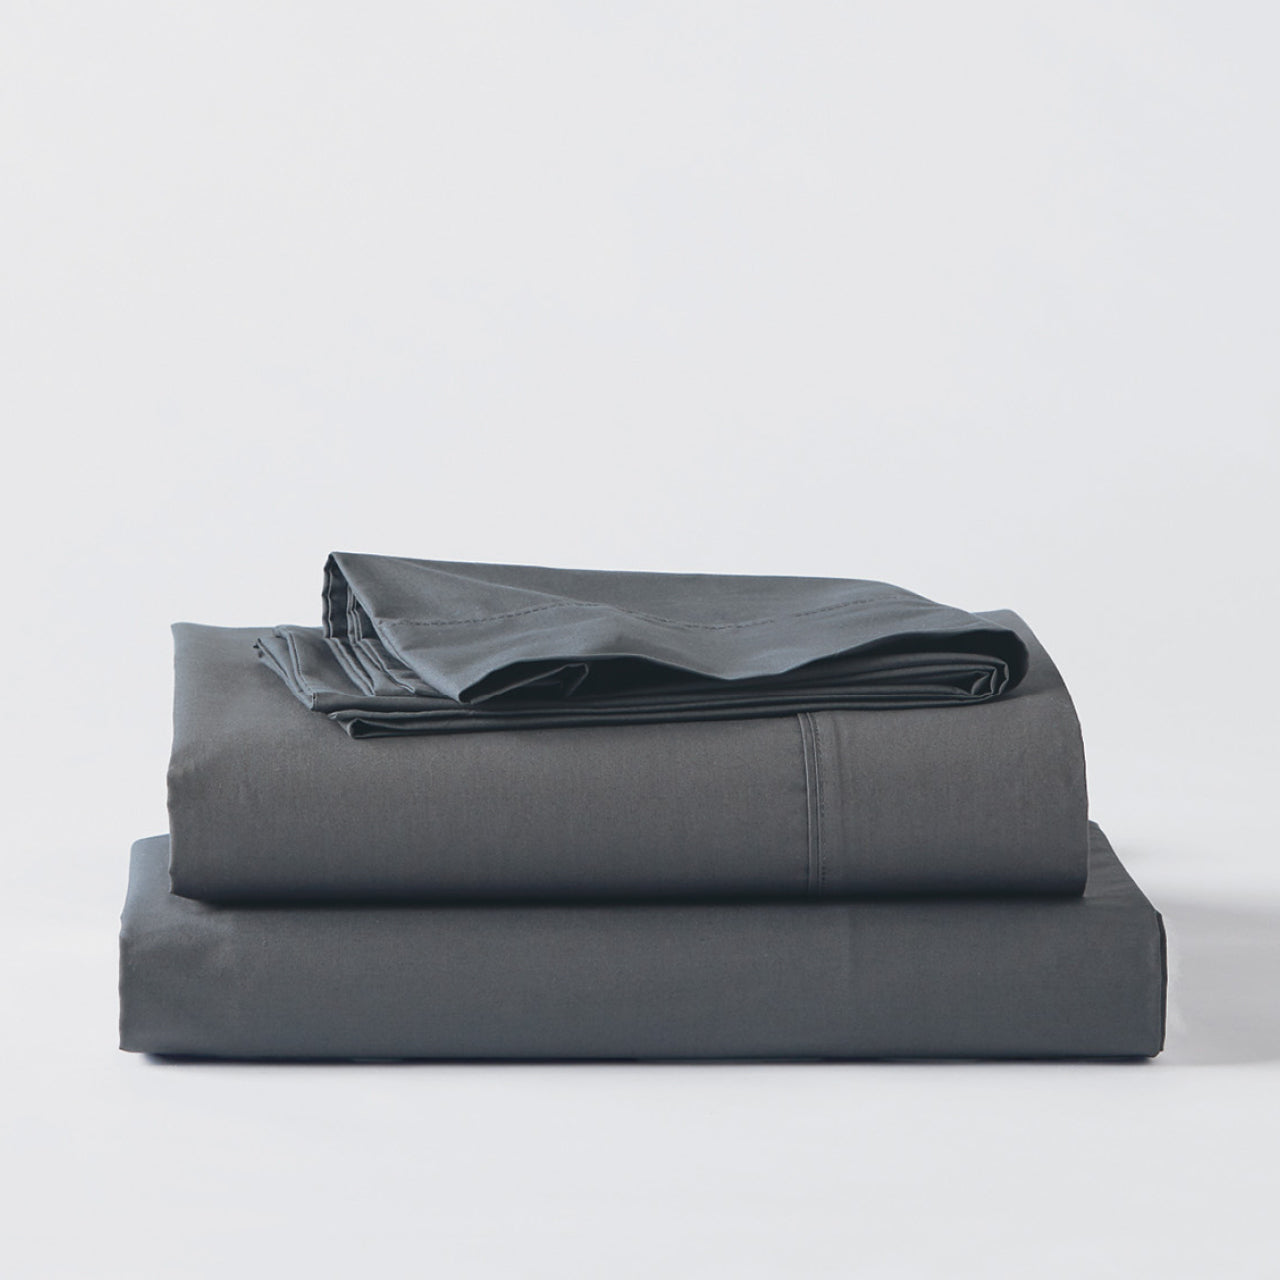 Premium Percale Charcoal Sheets folded up on floor